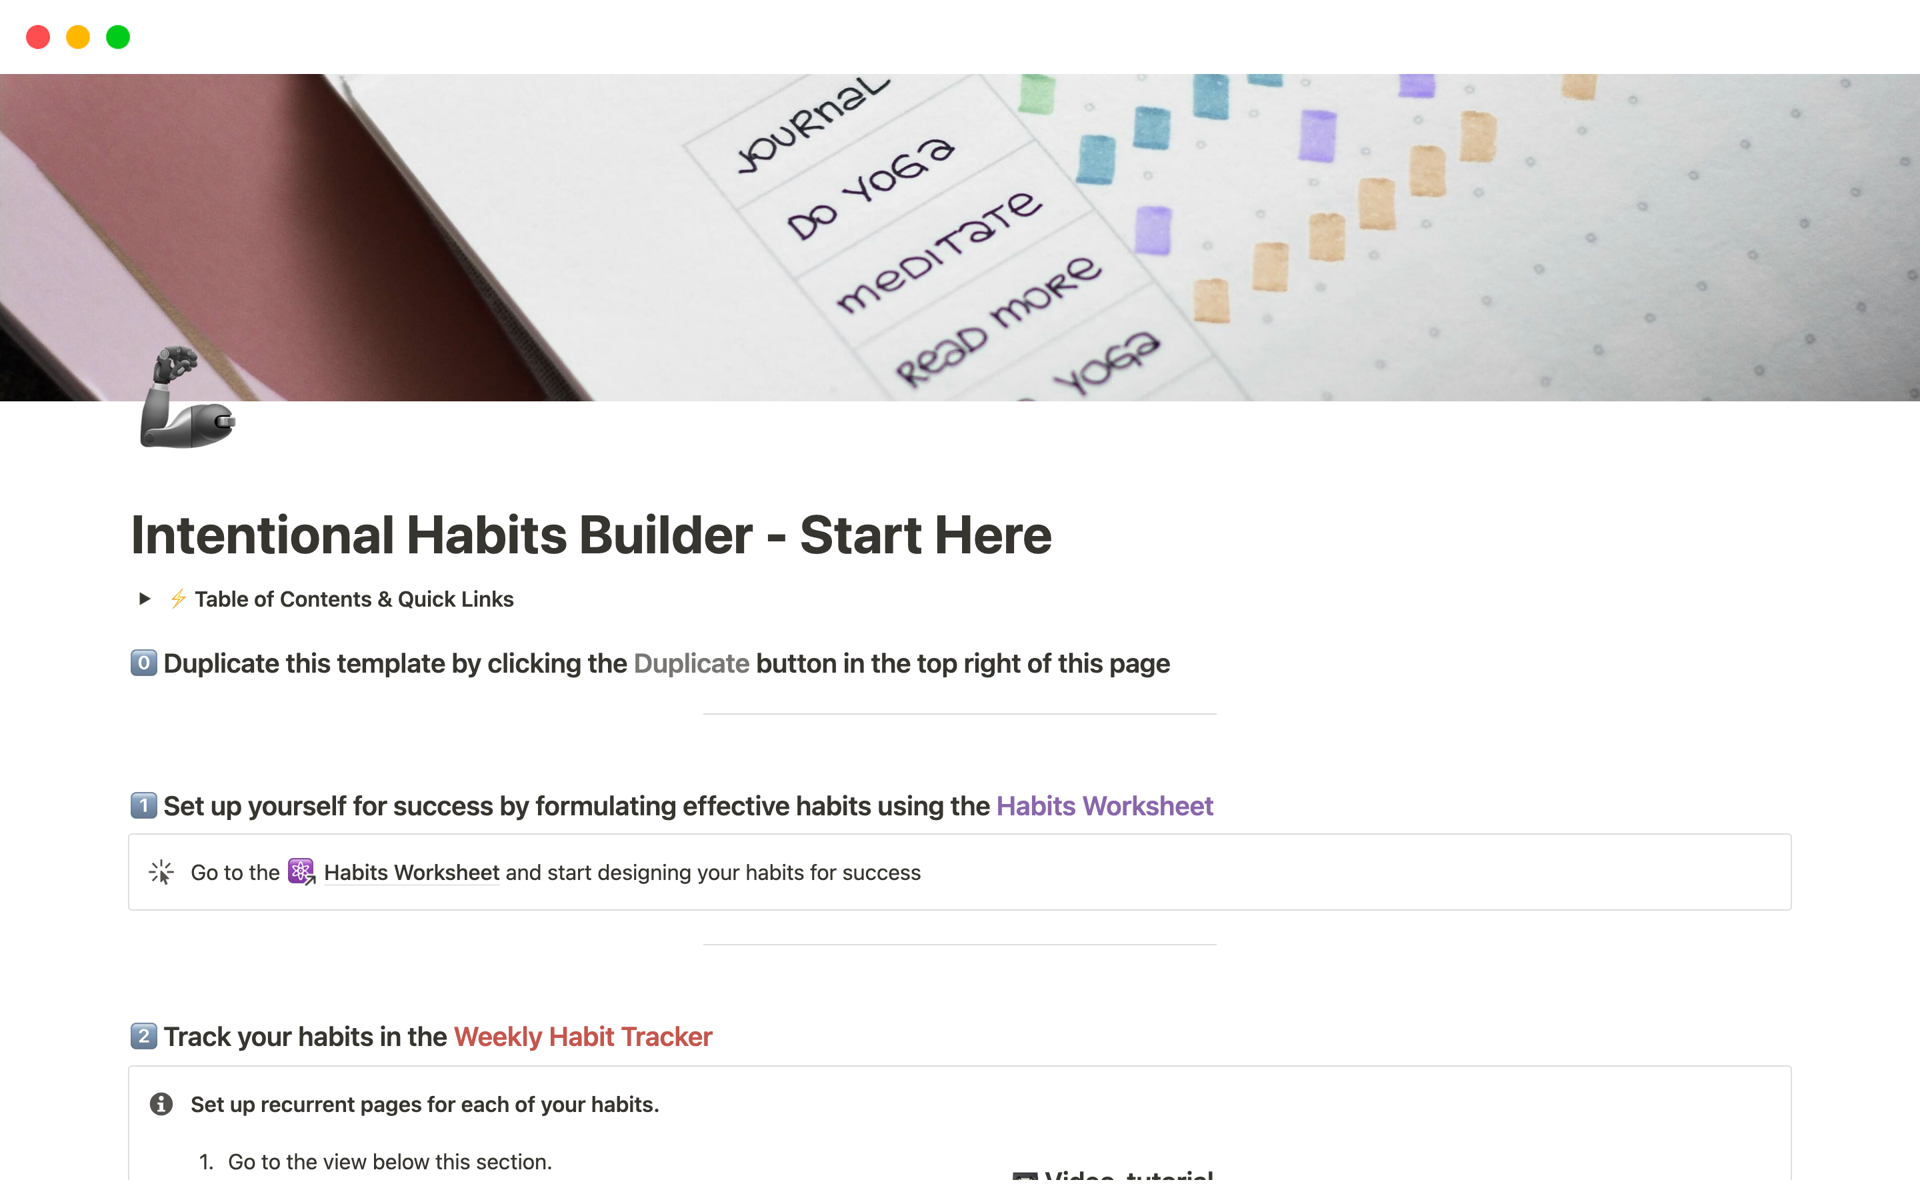 Level up your habits with Habits Builder. Track, optimize, and cultivate intentional habits that stick. Unleash your true potential today!